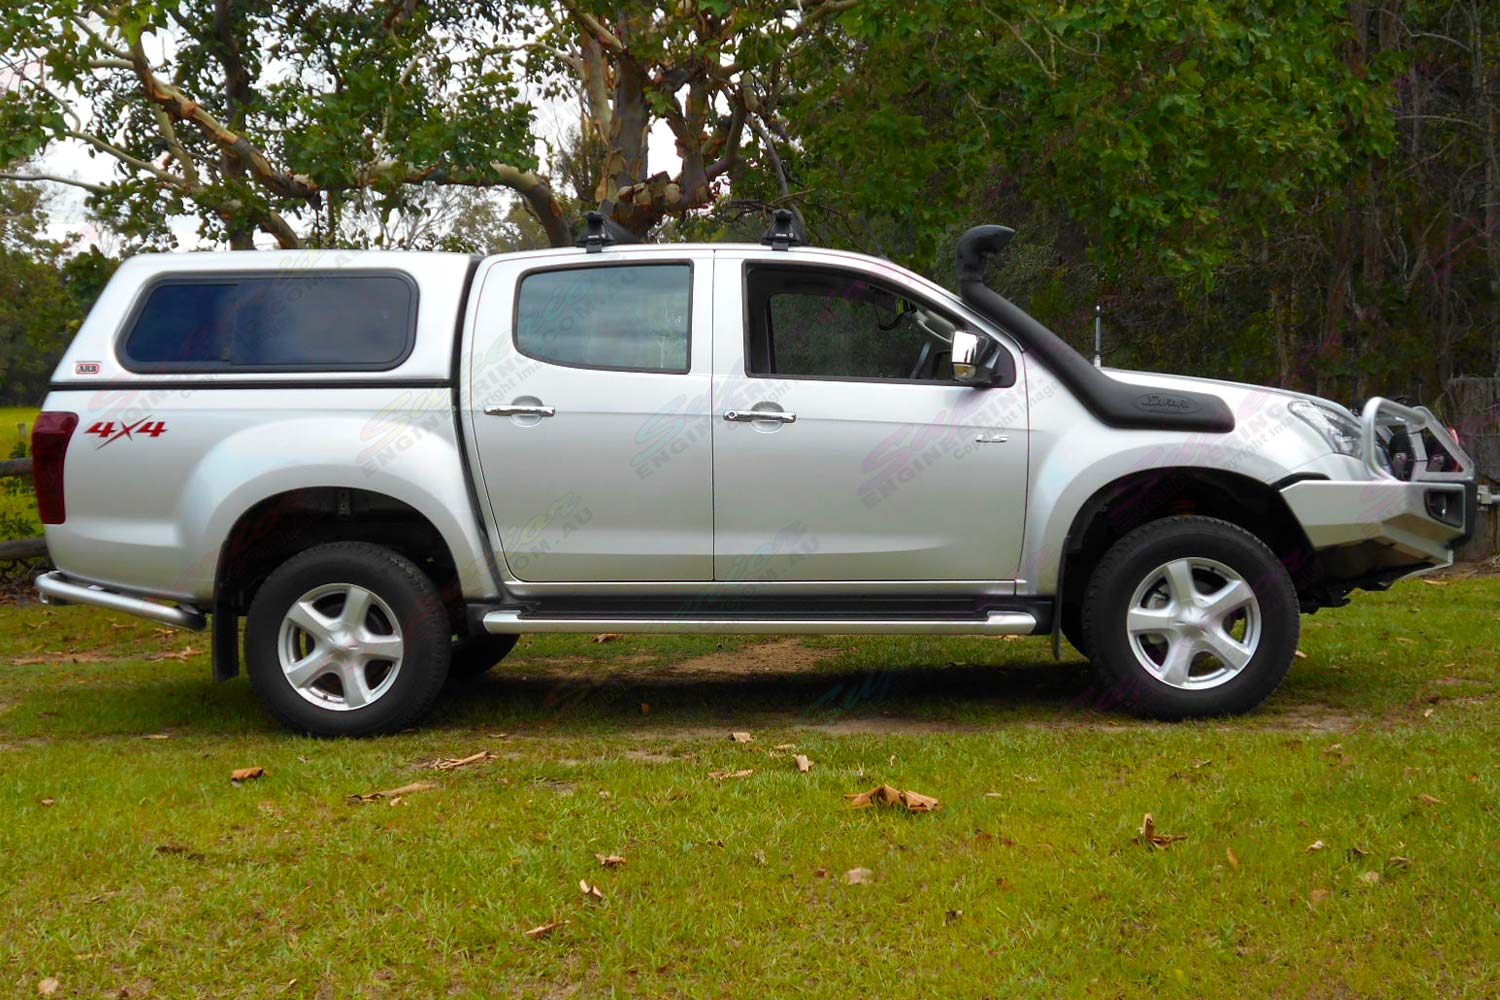 Right side view of a silver Isuzu D-Max dual cab fitted with a 2 inch superior nitro gas lift kit